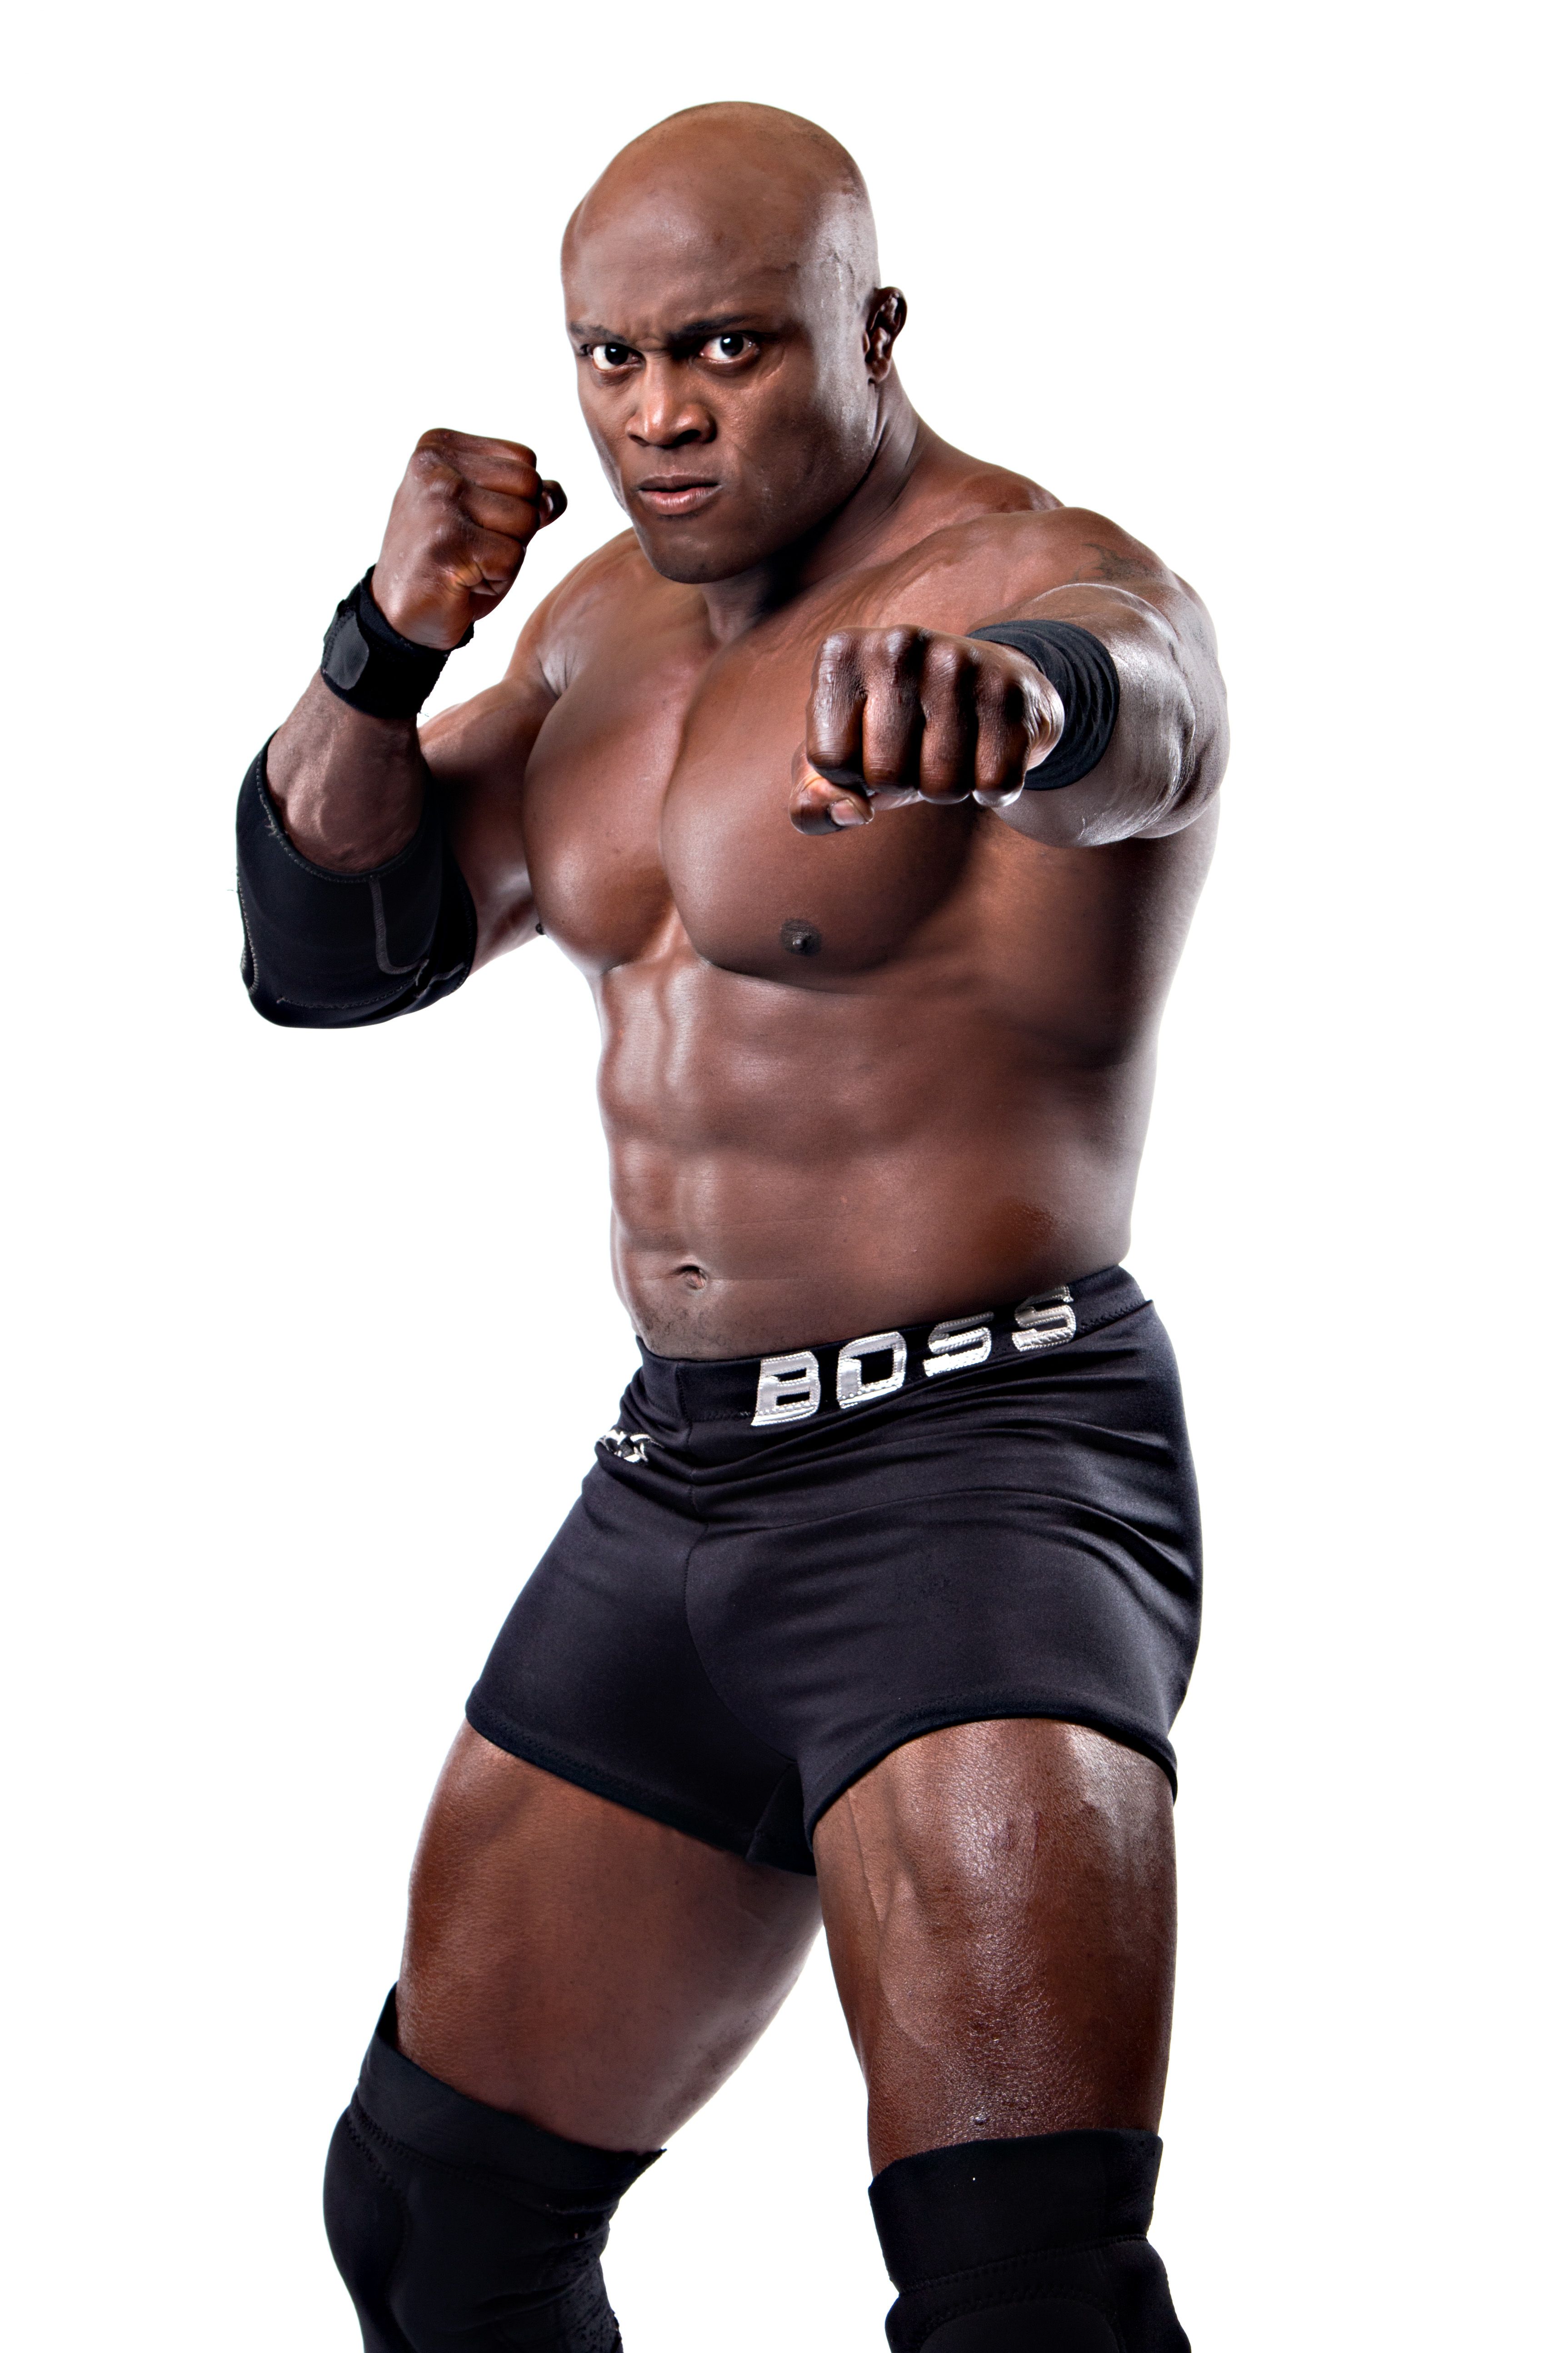 Pictures of Bobby Lashley.